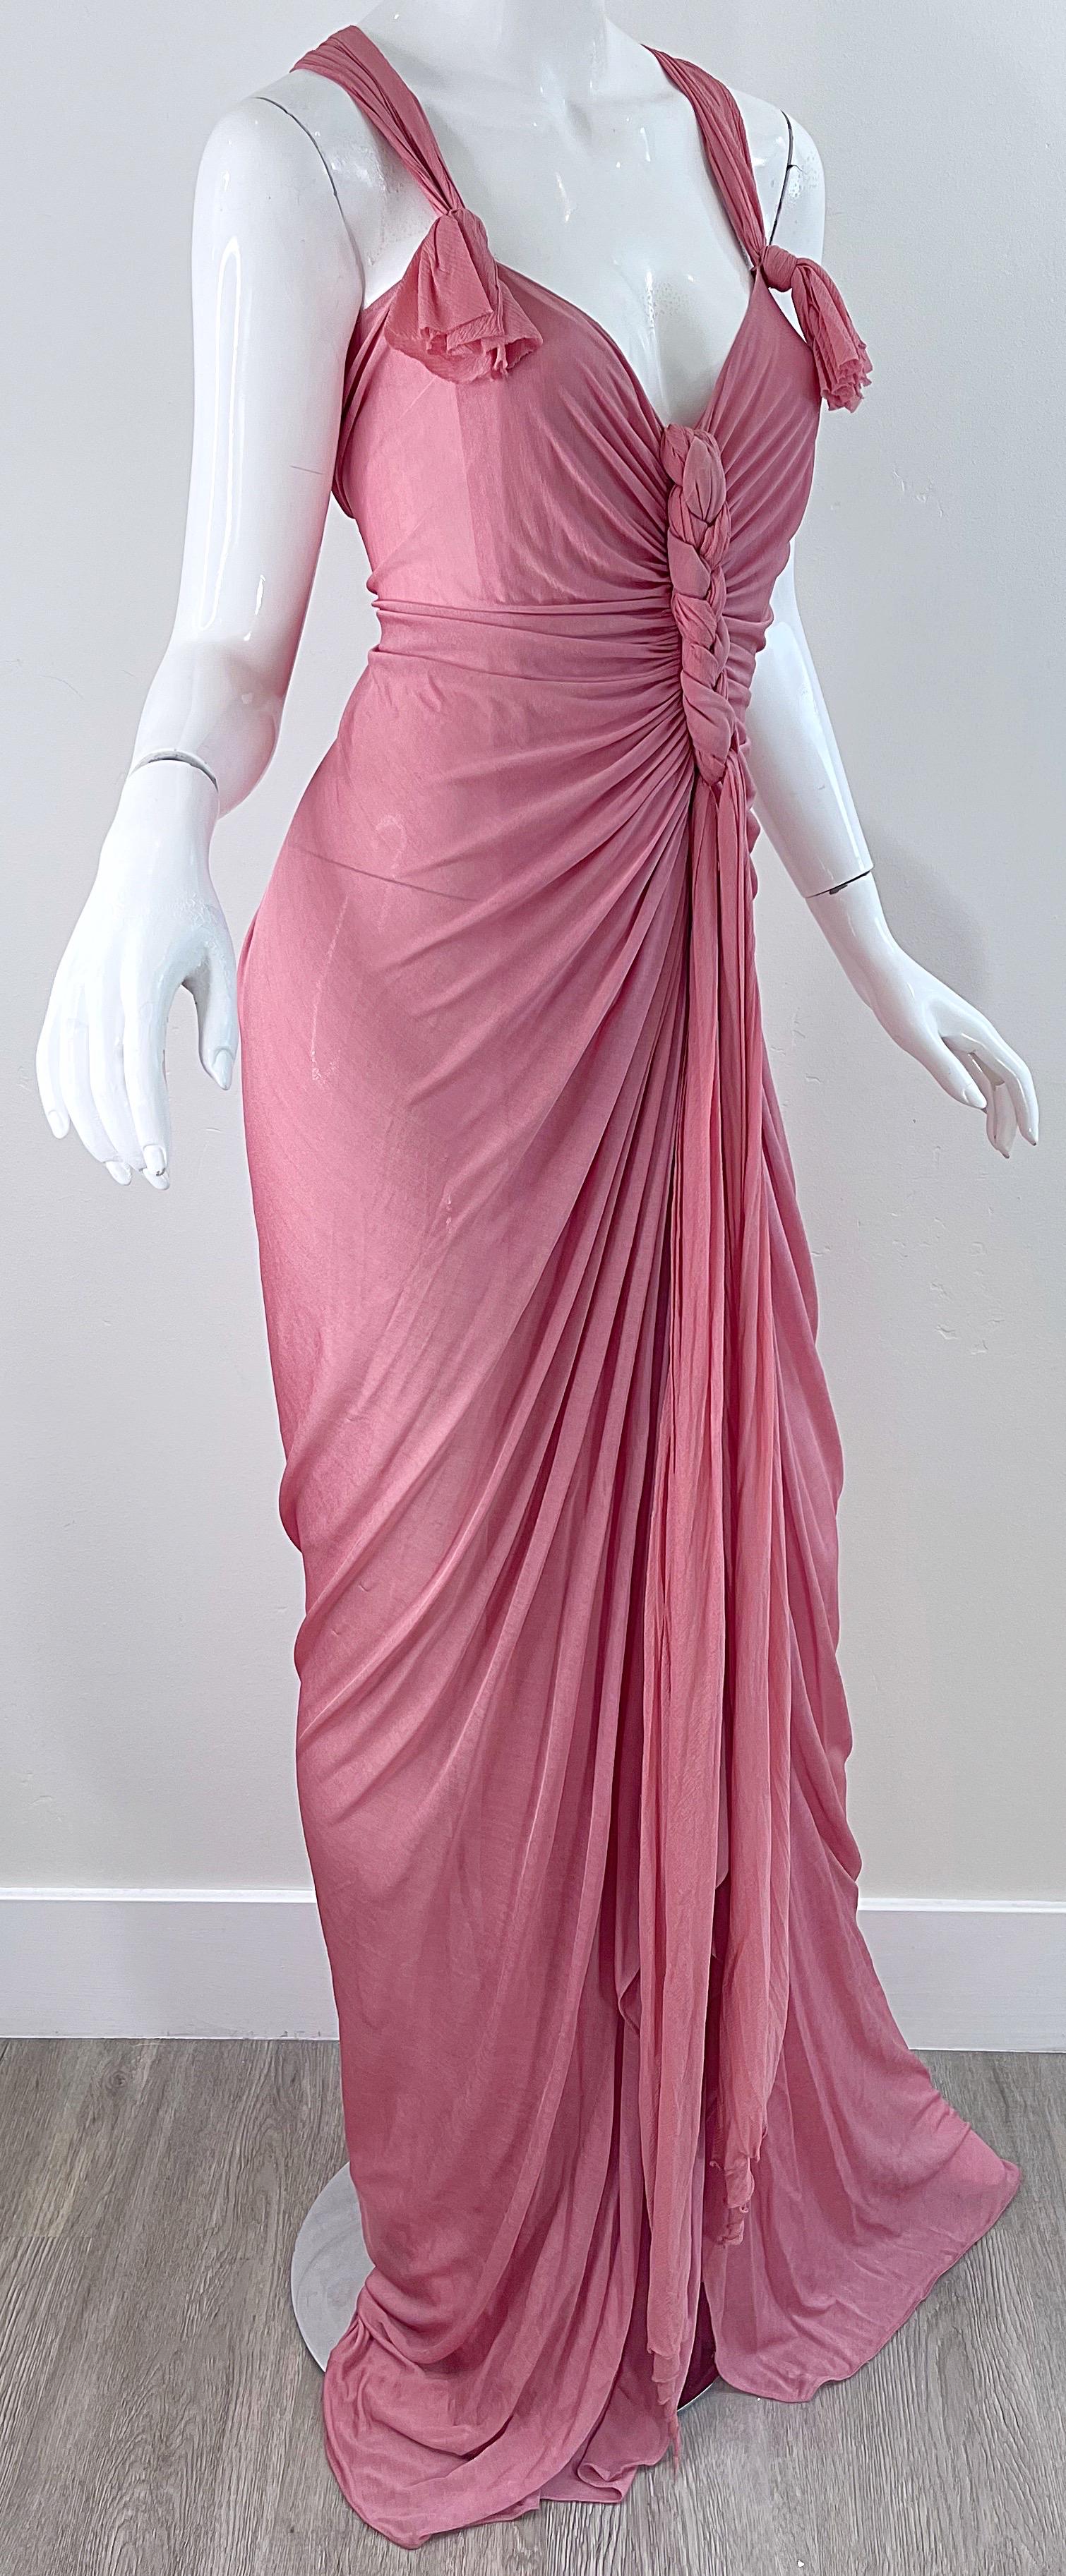 NWT Donna Karan Fall 2005 Pink Dusty Rose Mauve 30s Style Semi Sheer Gown Dress For Sale 4